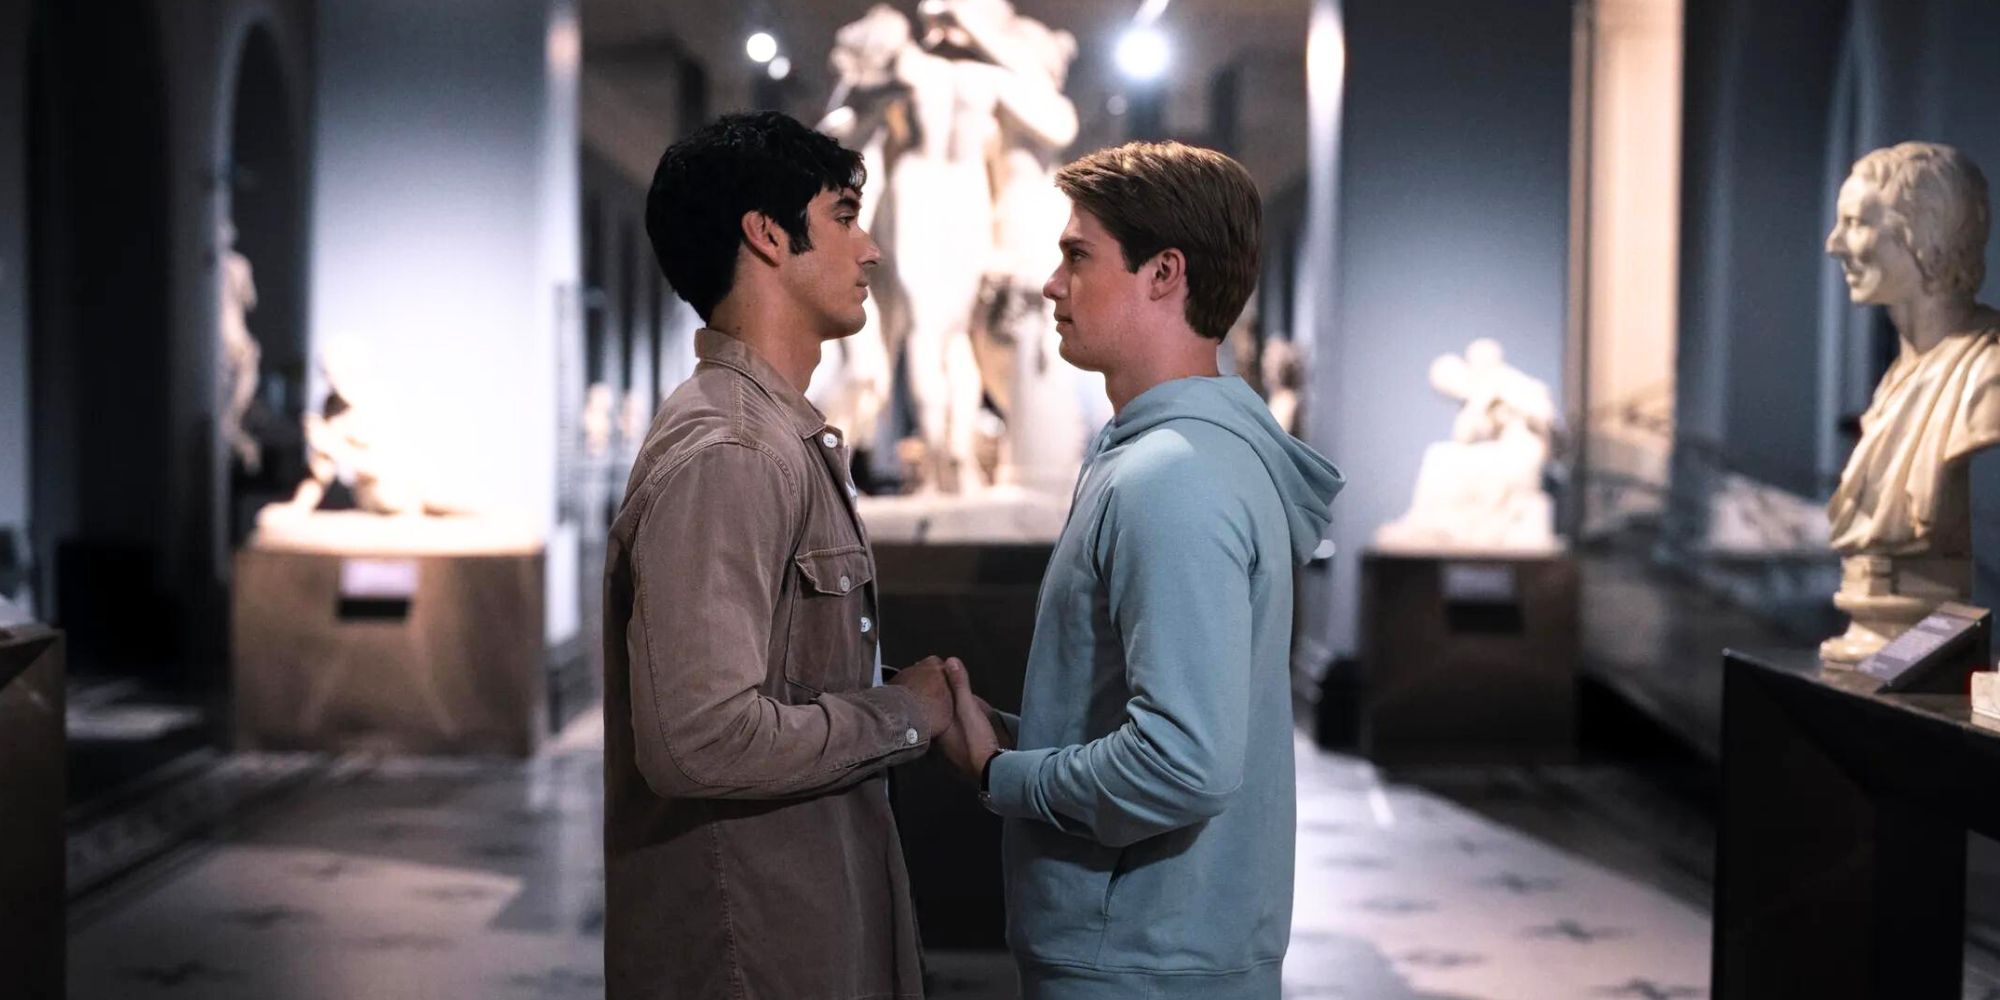 Alex (Taylor Zakhar Perez) and Henry (Nicholas Galitzine) at the British Museum in Red, White and Royal Blue